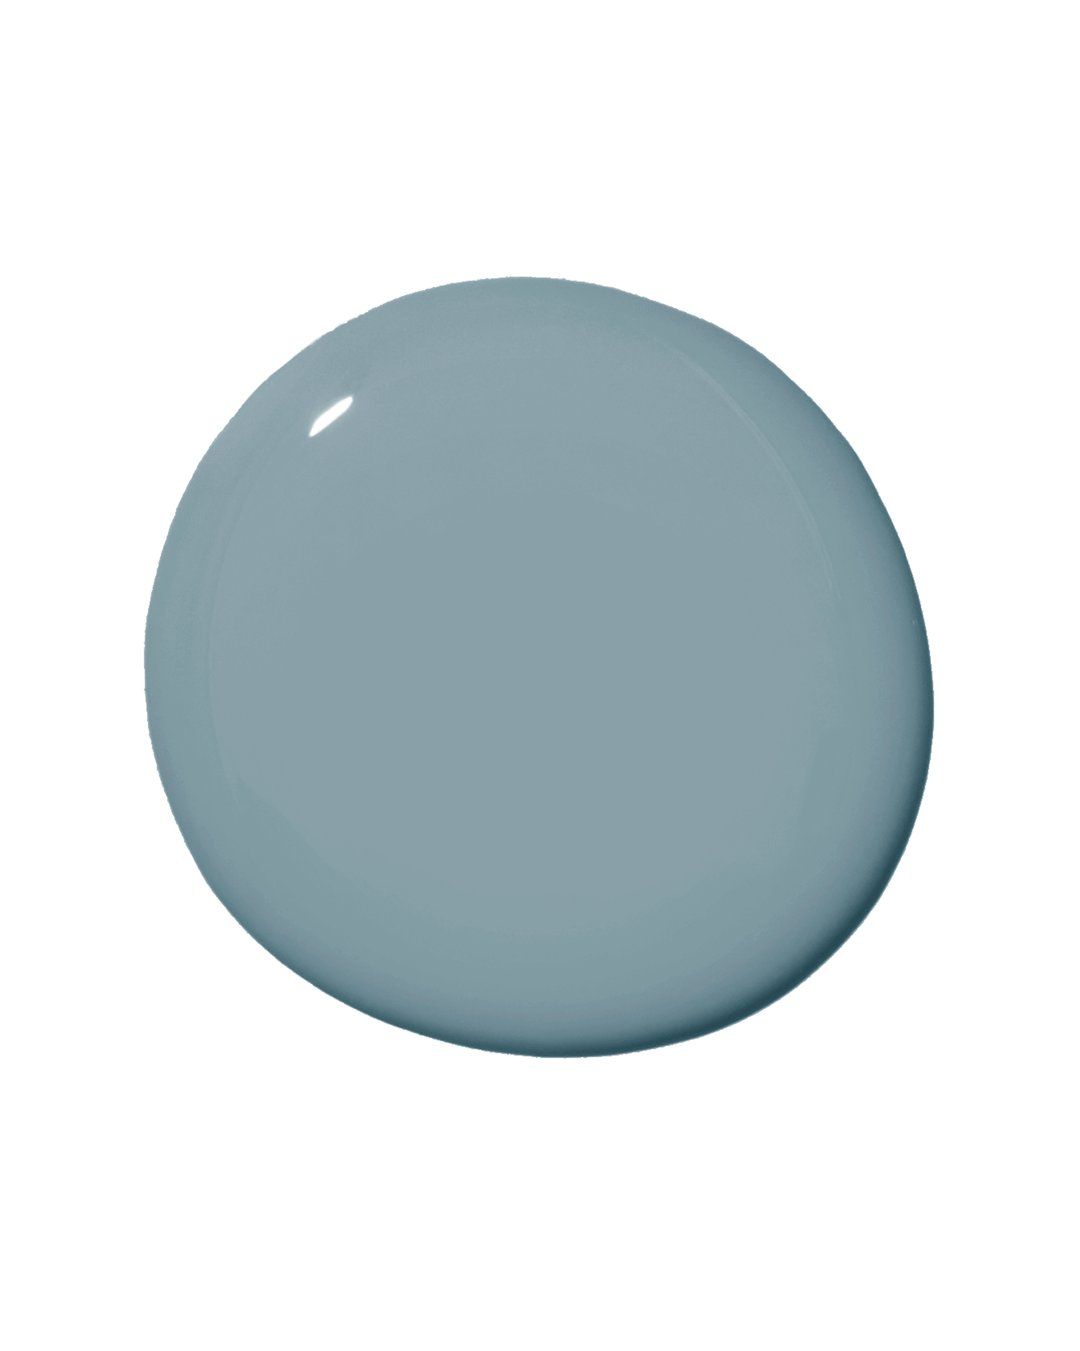 Pin on Paint colors